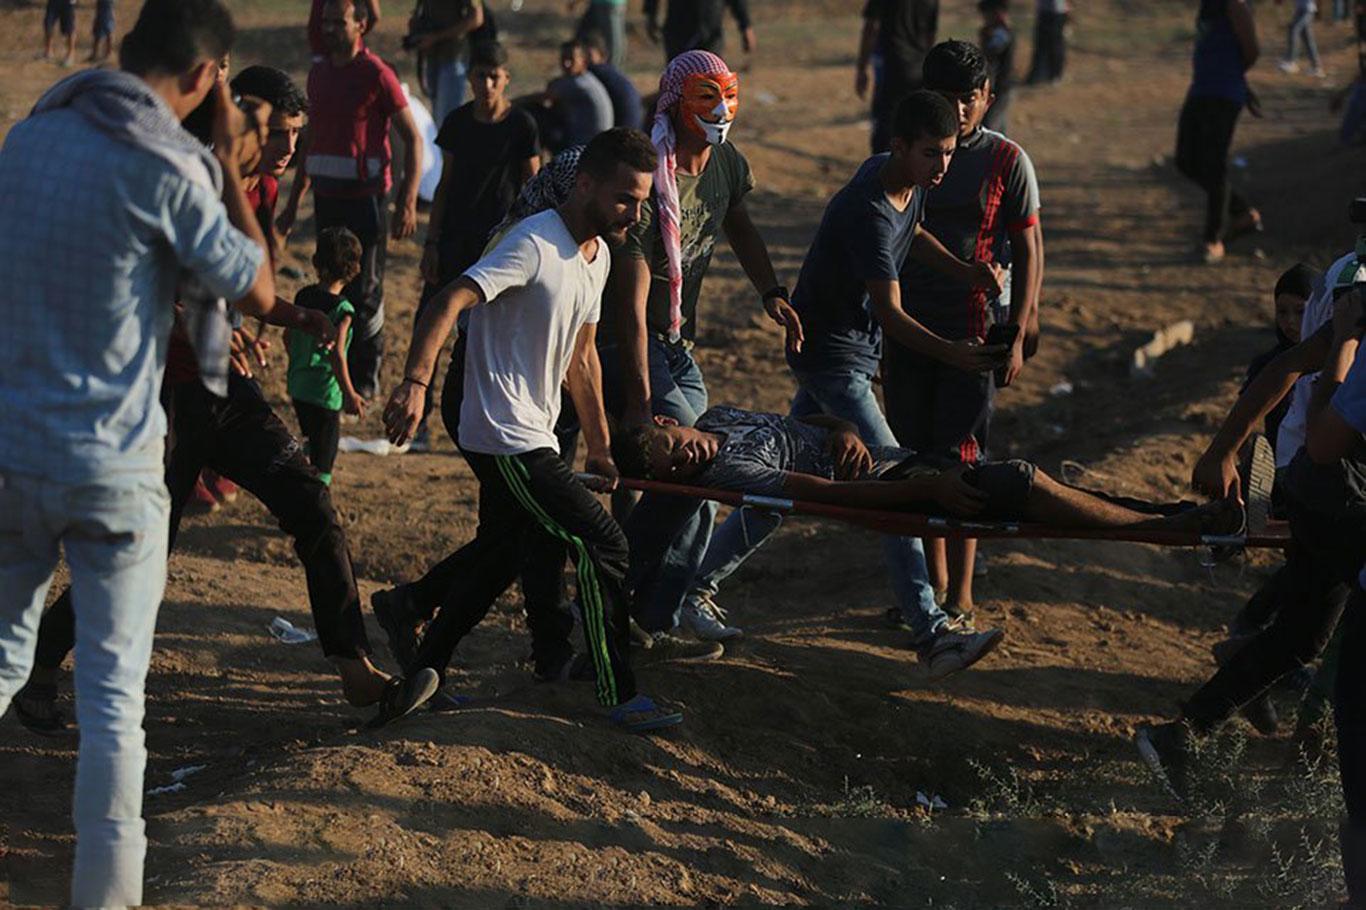 Zionist gangs injures dozen of Gazans protesting the Deal of the Century